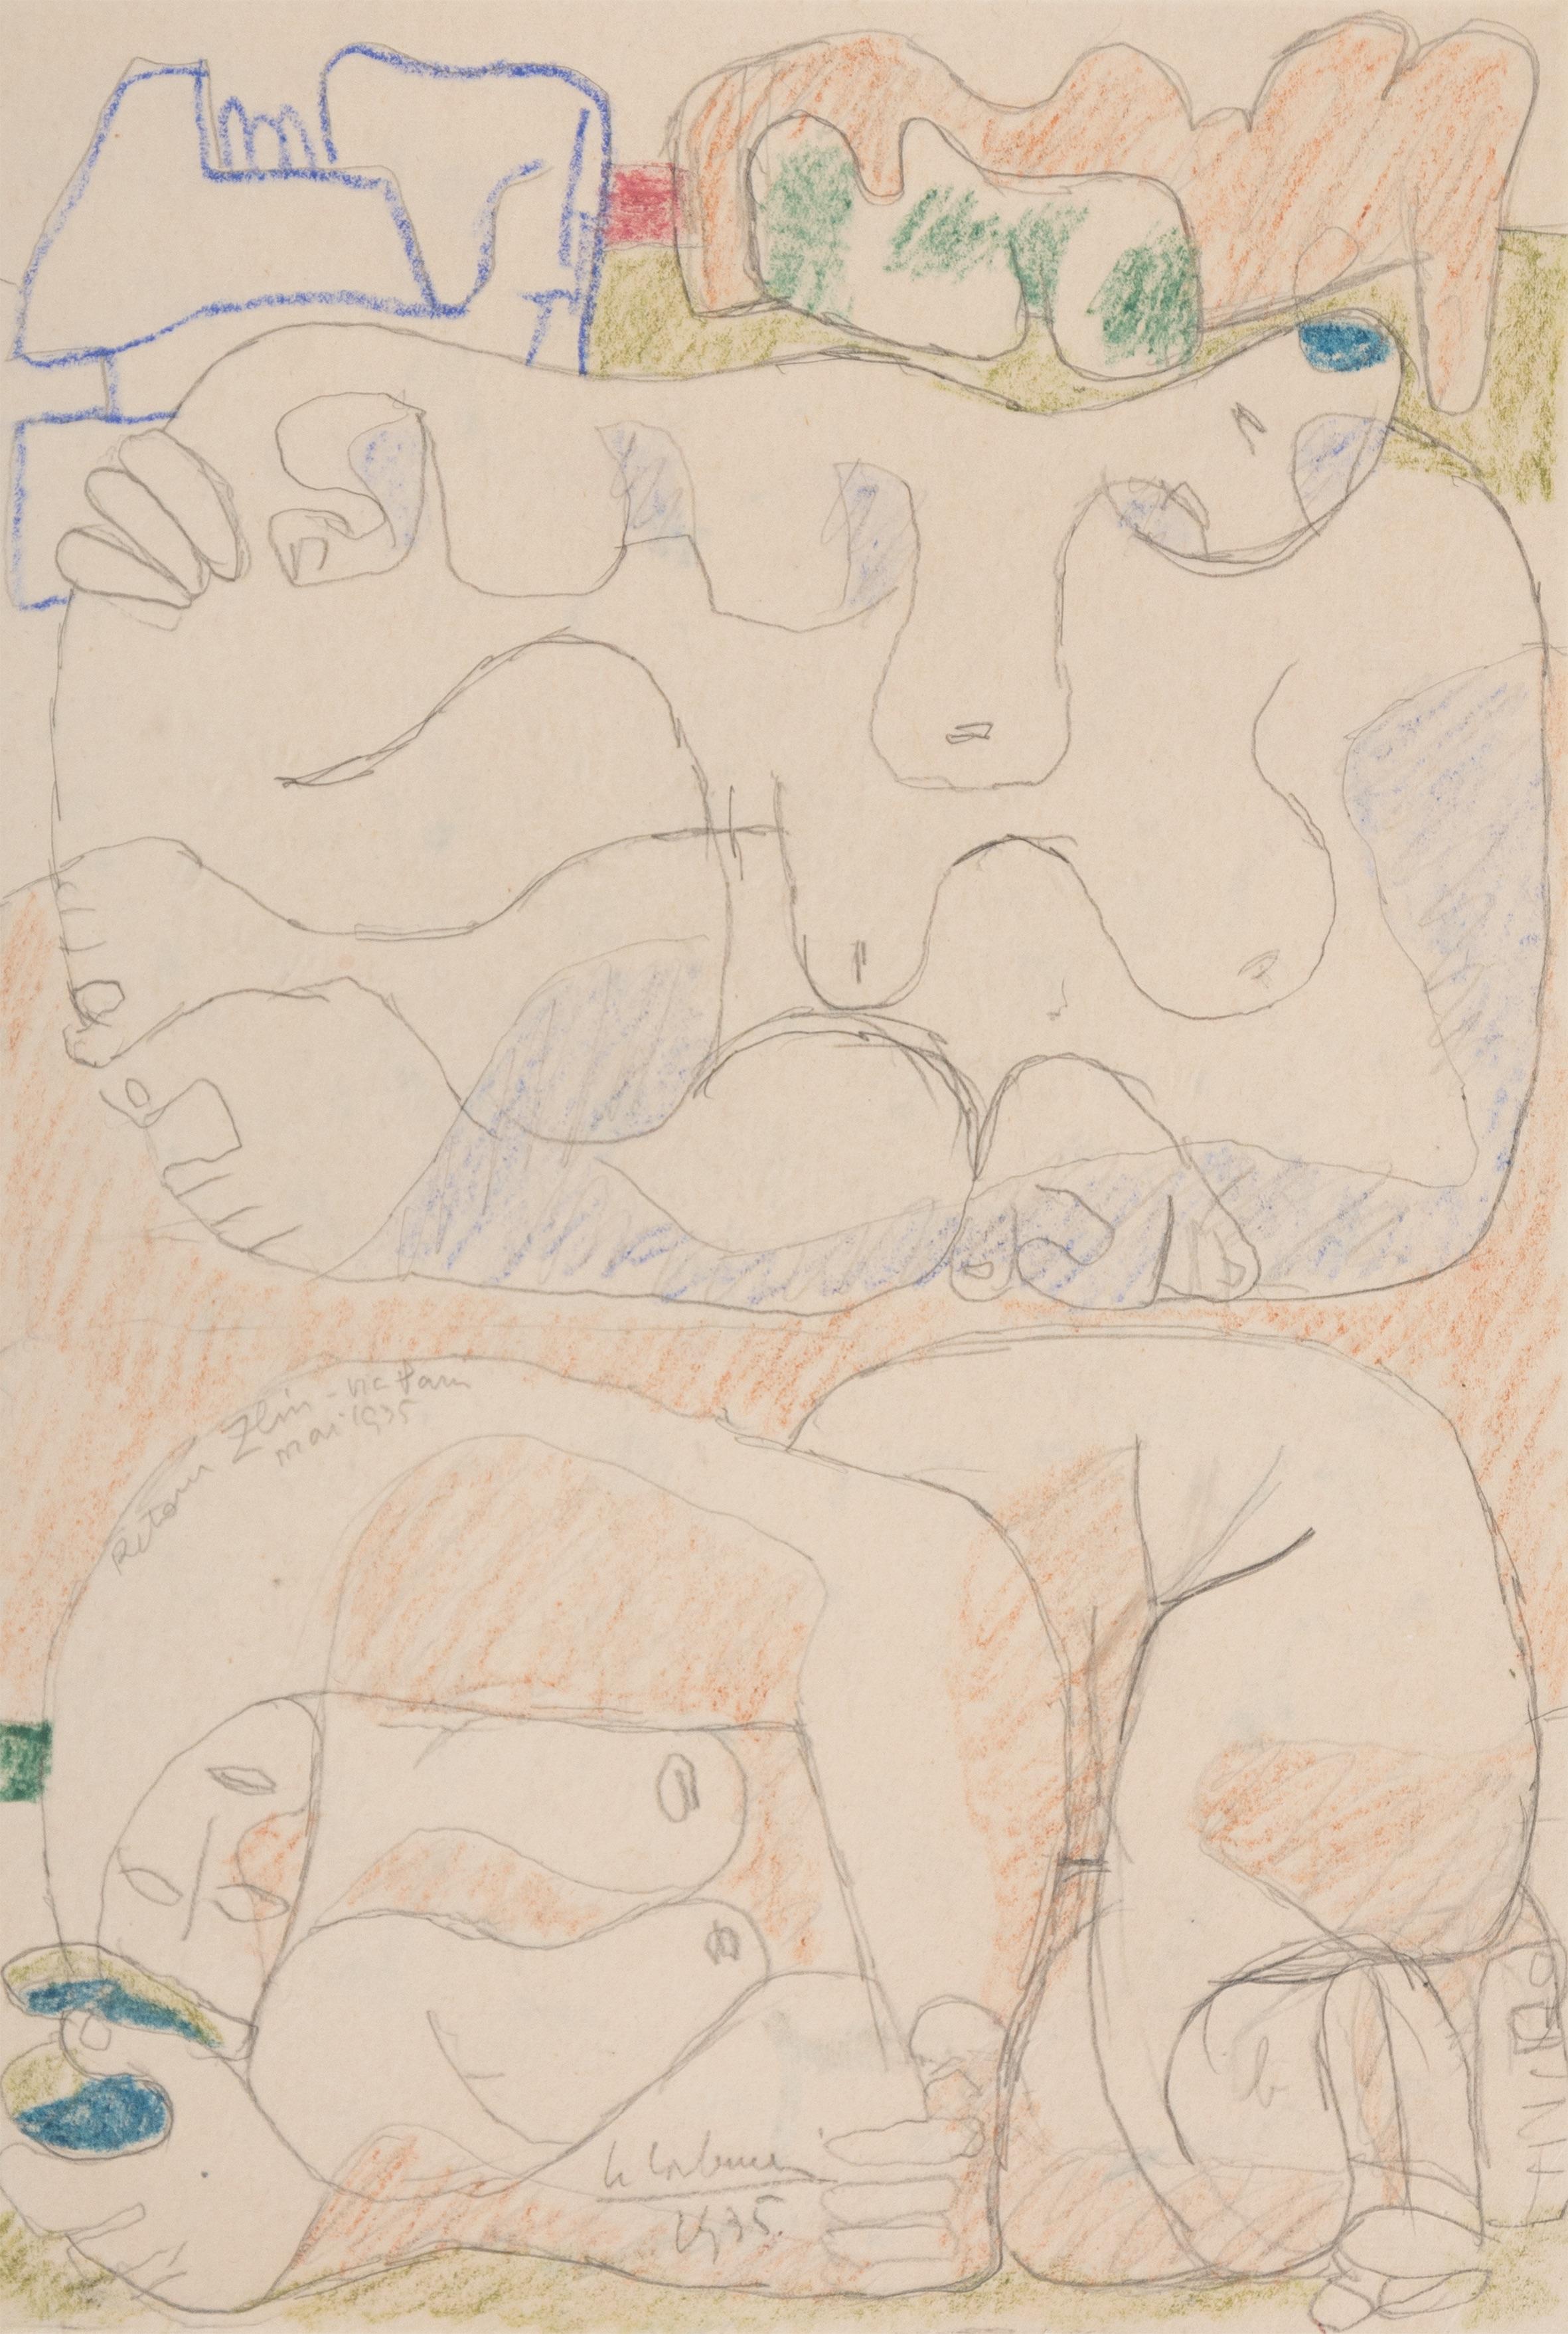 Femmes couchées is an original artwork realized by Charles-Édouard Jeanneret (Le Corbusier) in 1935.

Pencil and pastel on paper. Signed and dated on the lower center. Signed and date in pencil also on the cardboard support.

Includes a frame